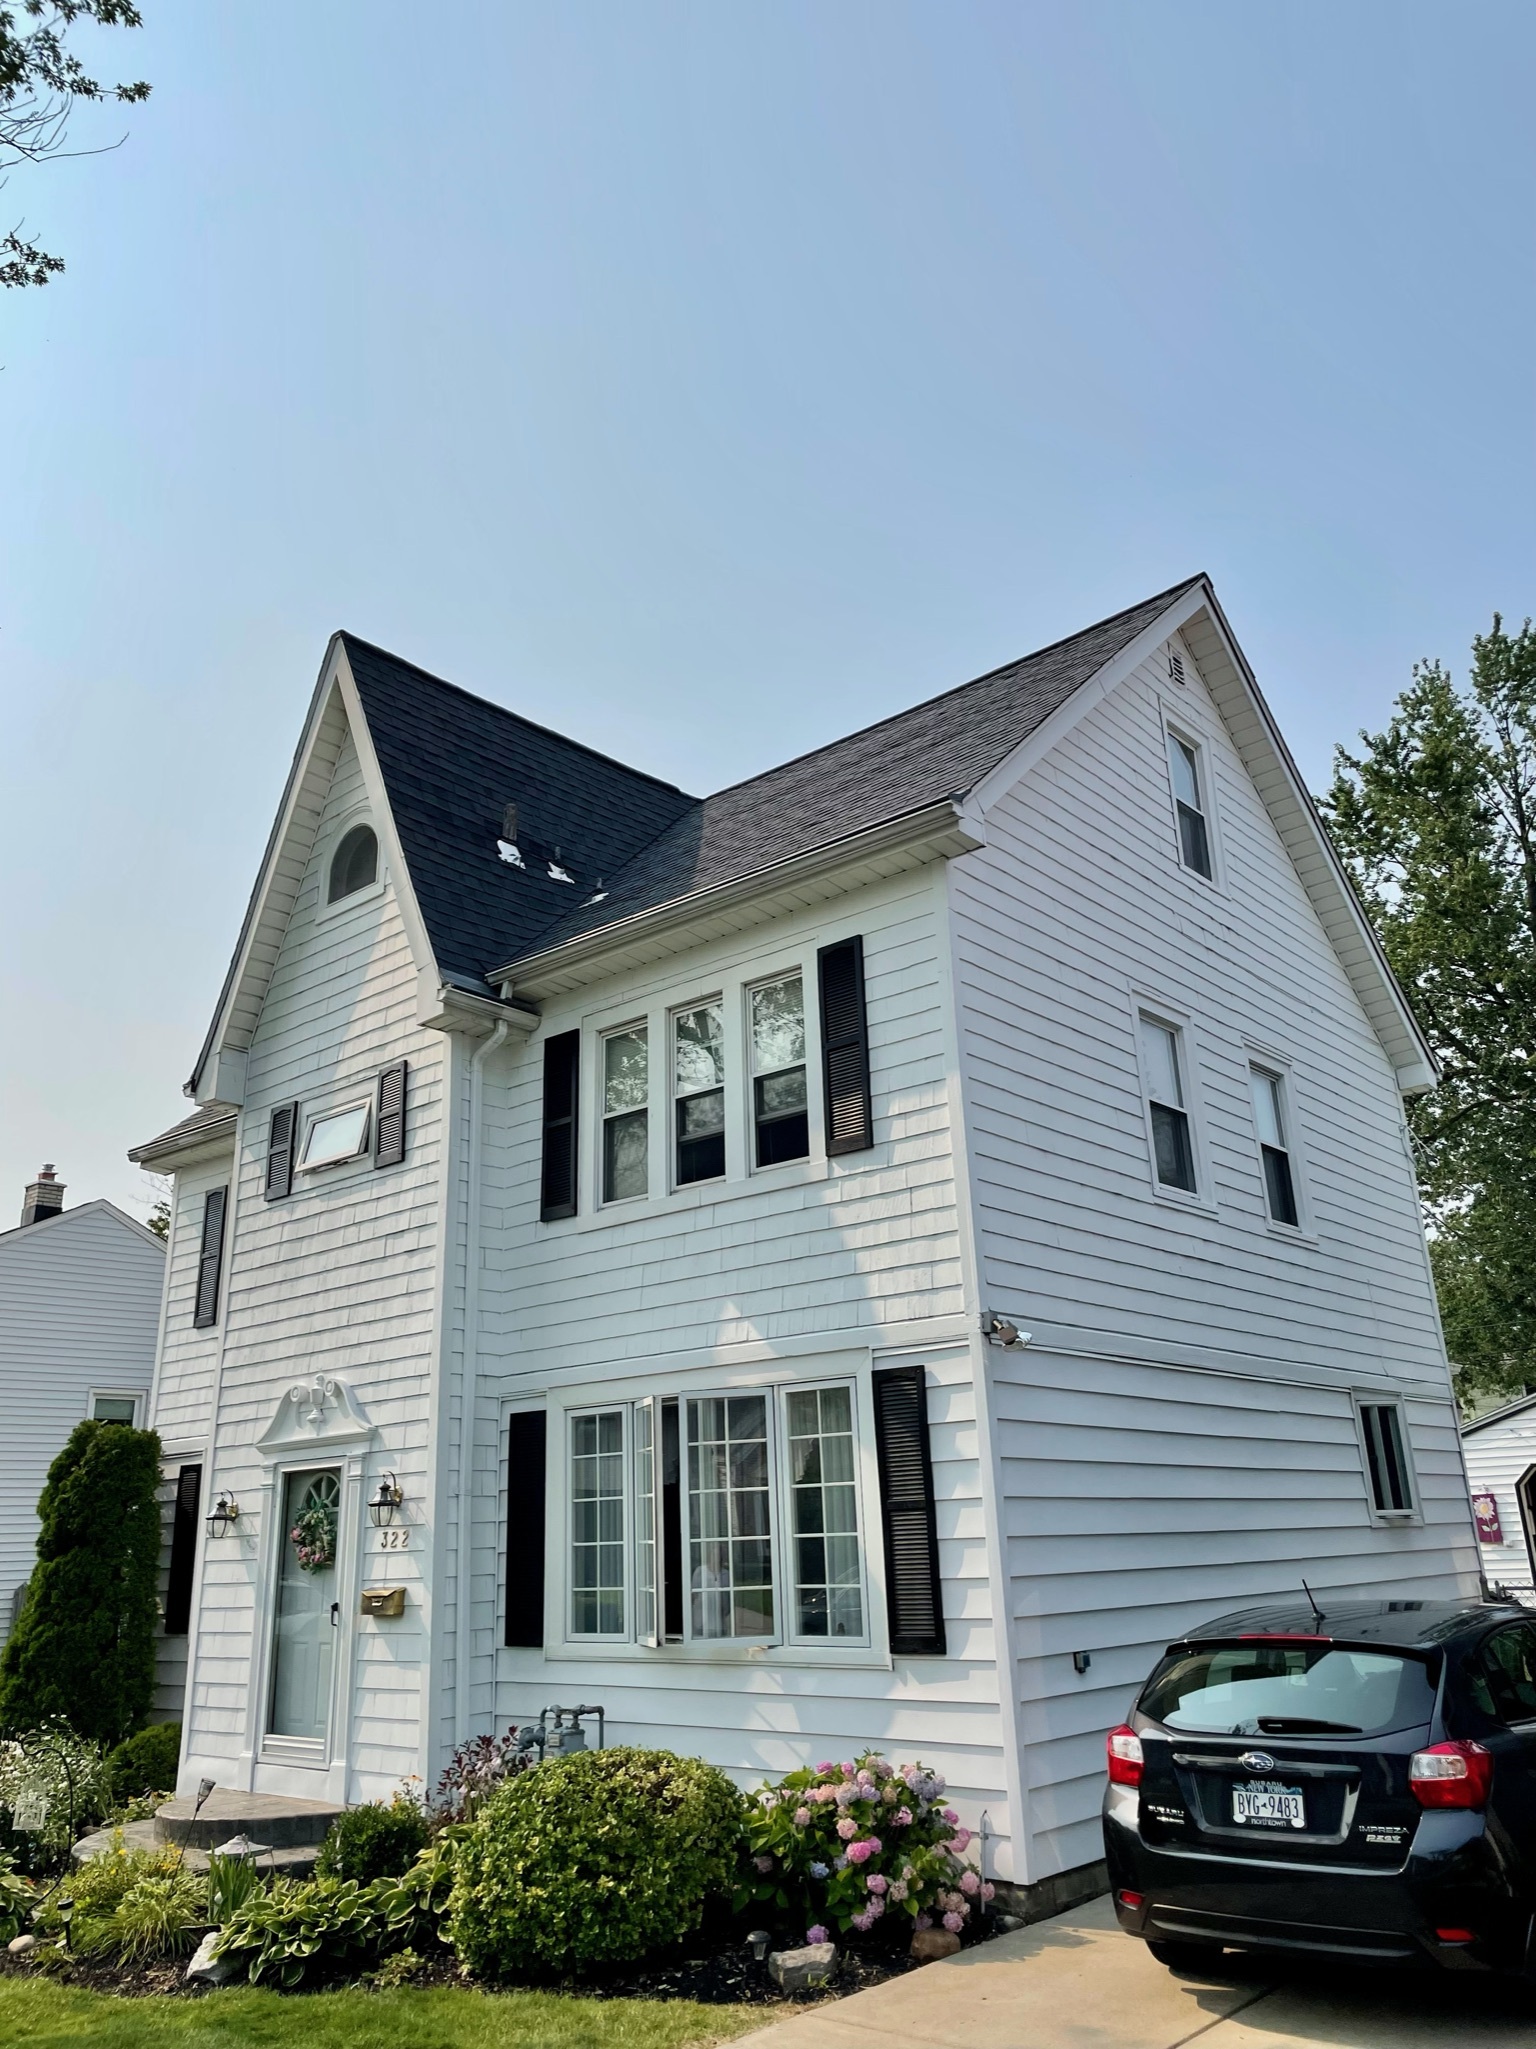 Home with new color from professional exterior painting in Buffalo, NY